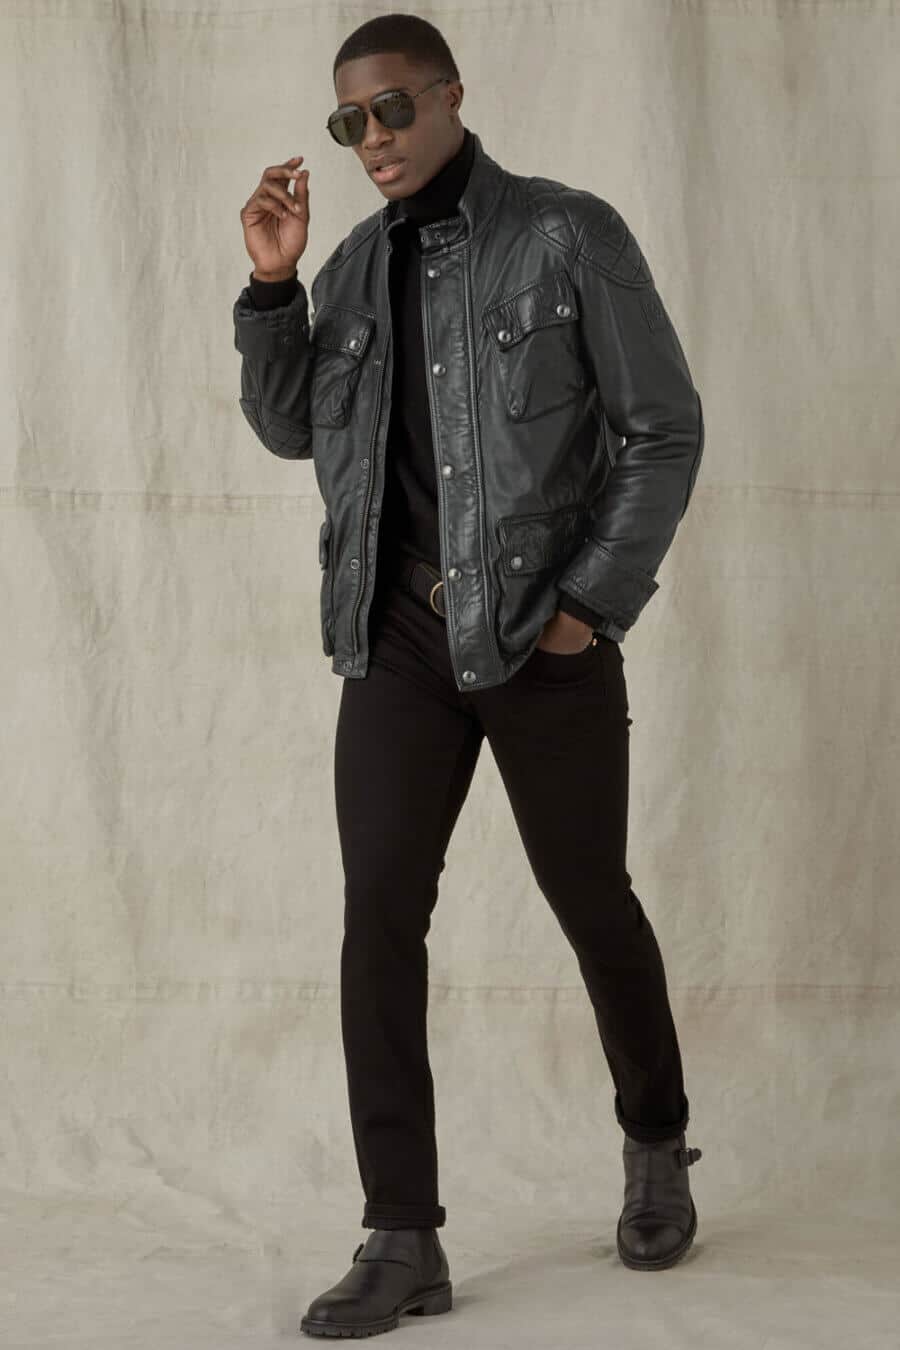 Men's all black outfit with leather motorcycle jacket, jeans and biker boots